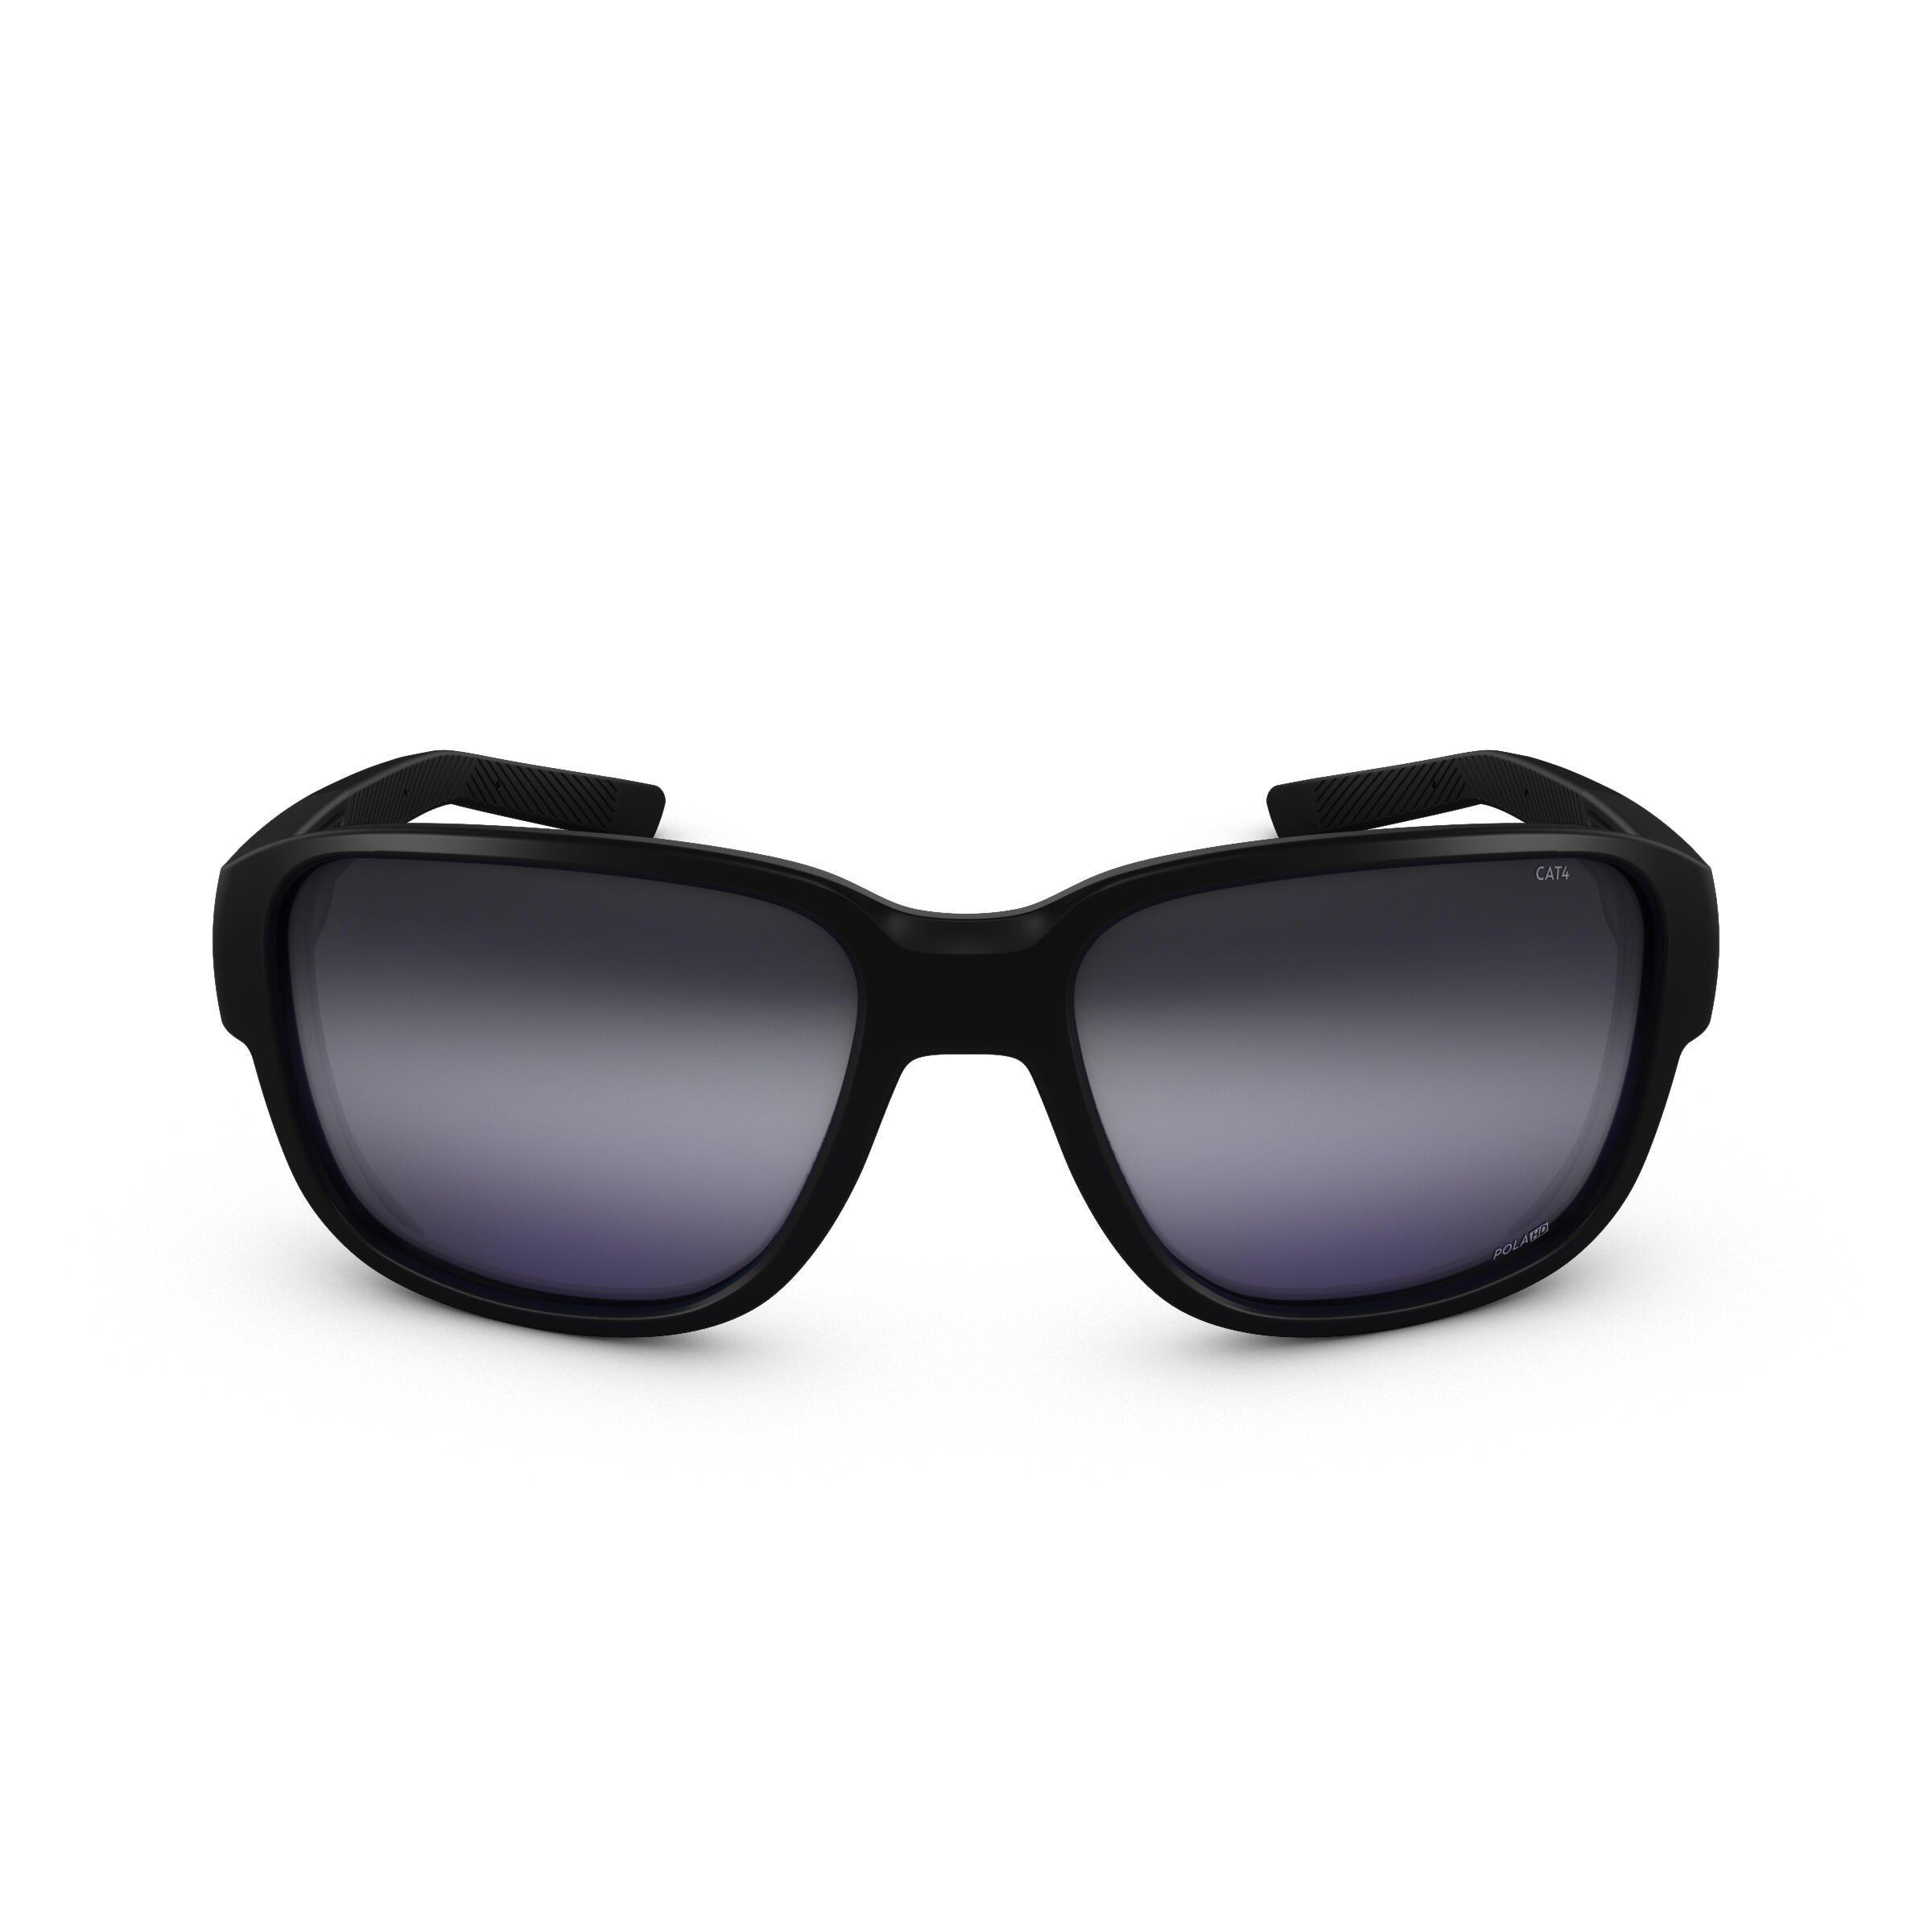 Share more than 292 category 4 sunglasses oakley latest